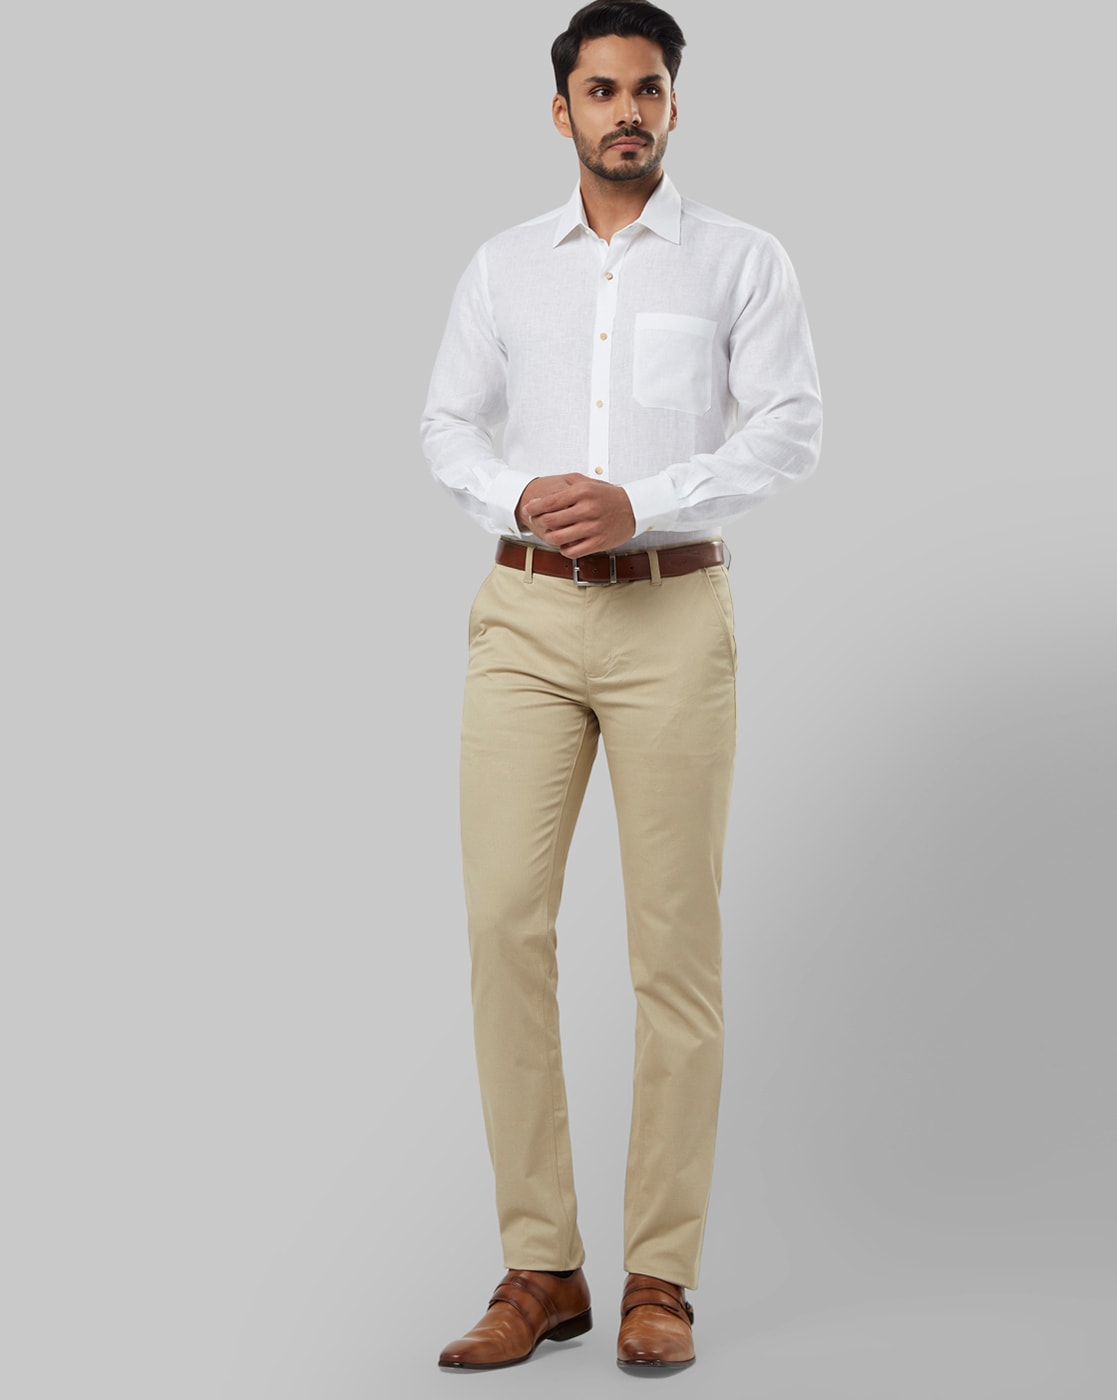 Best White Formal Shirts for Men  Buy Now  The Indian Threads